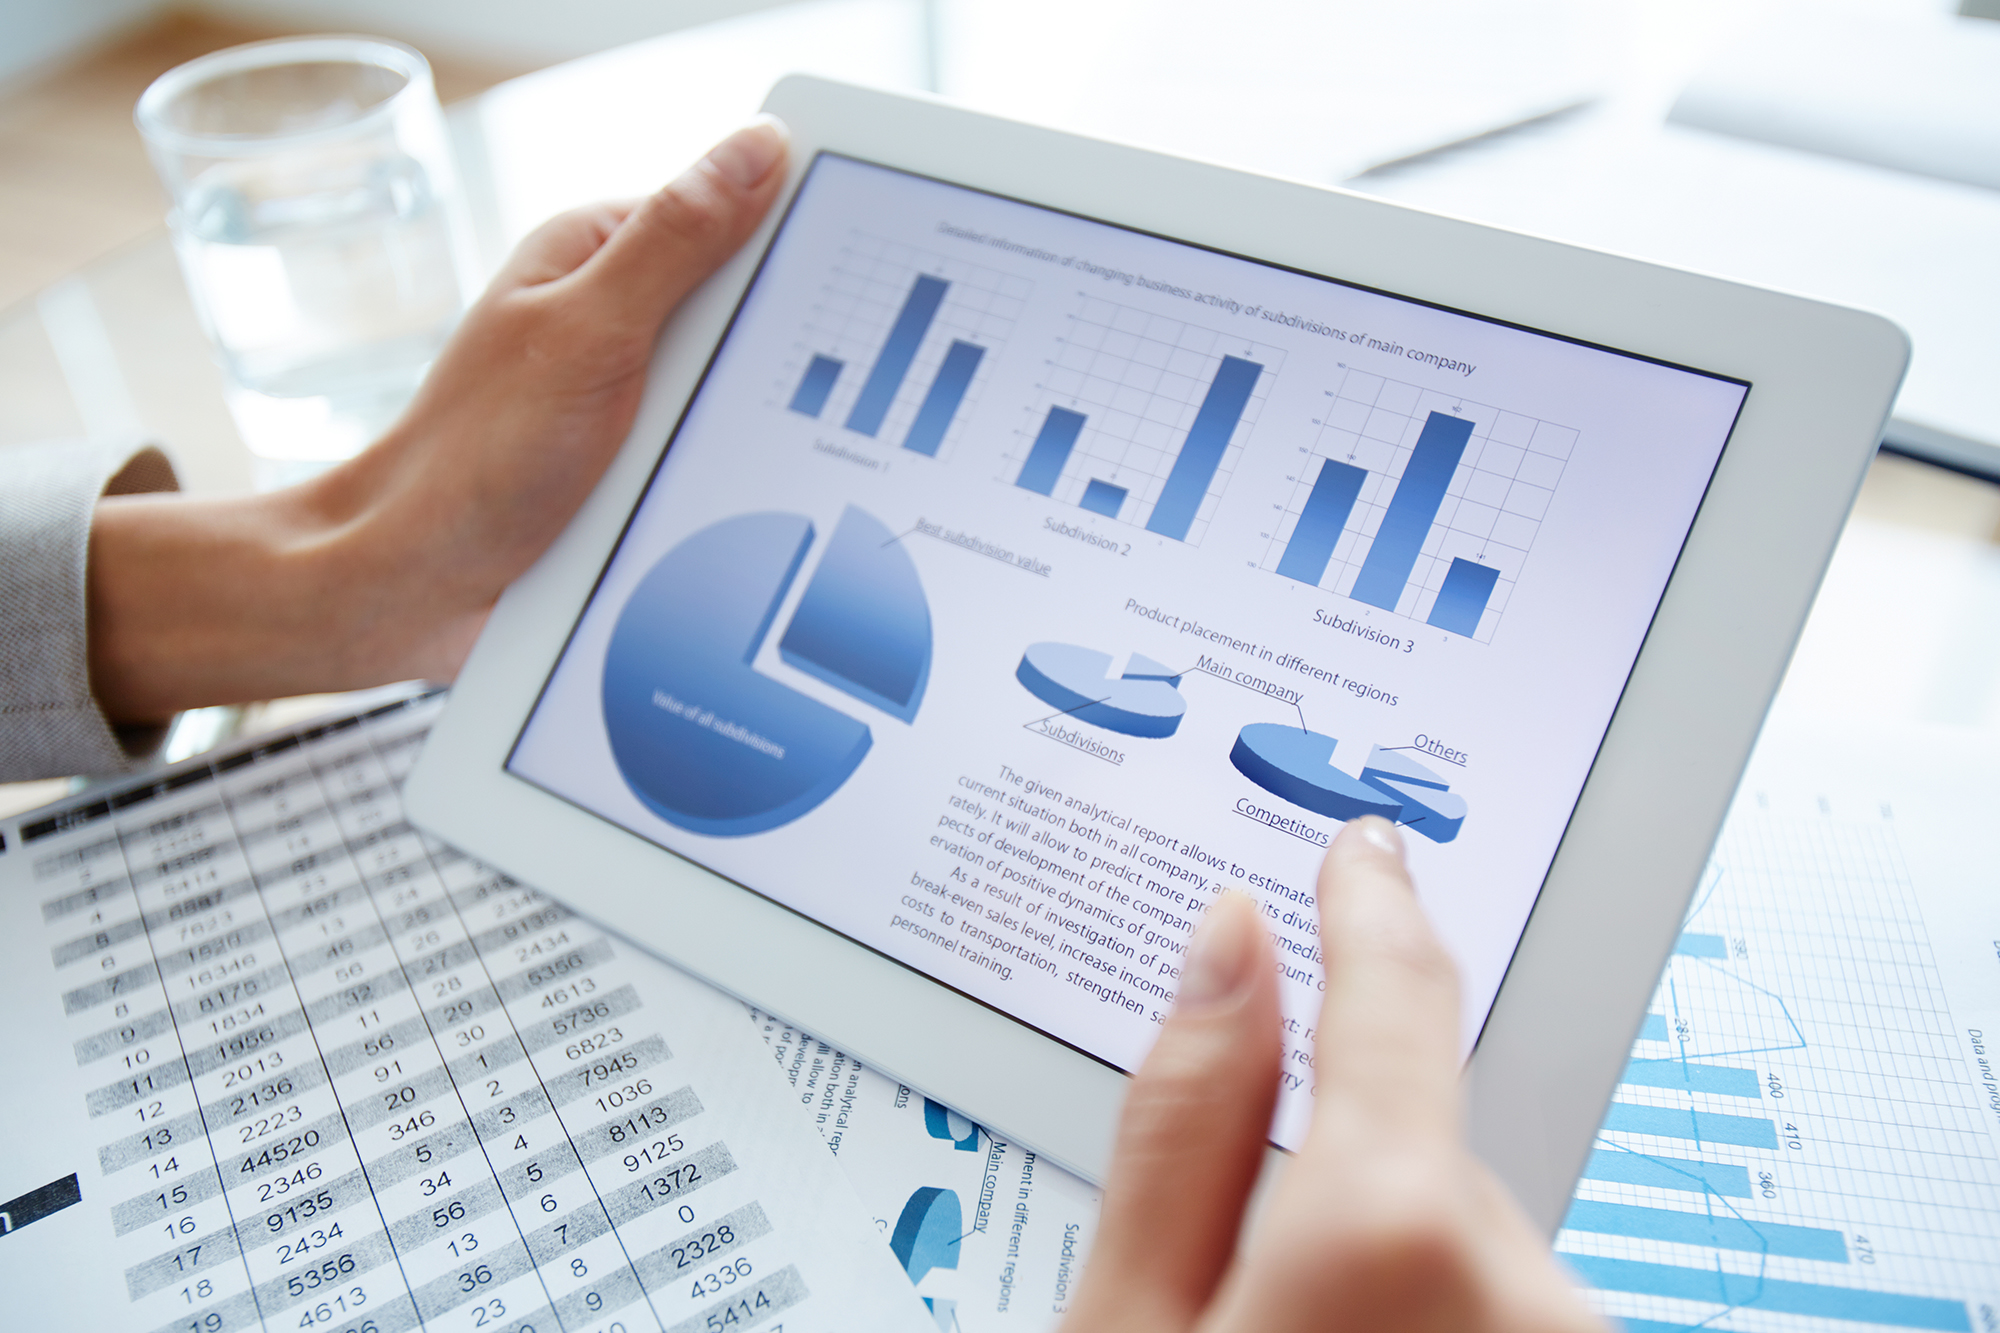 Descriptive image: hands holding a tablet with graphs and charts displayed